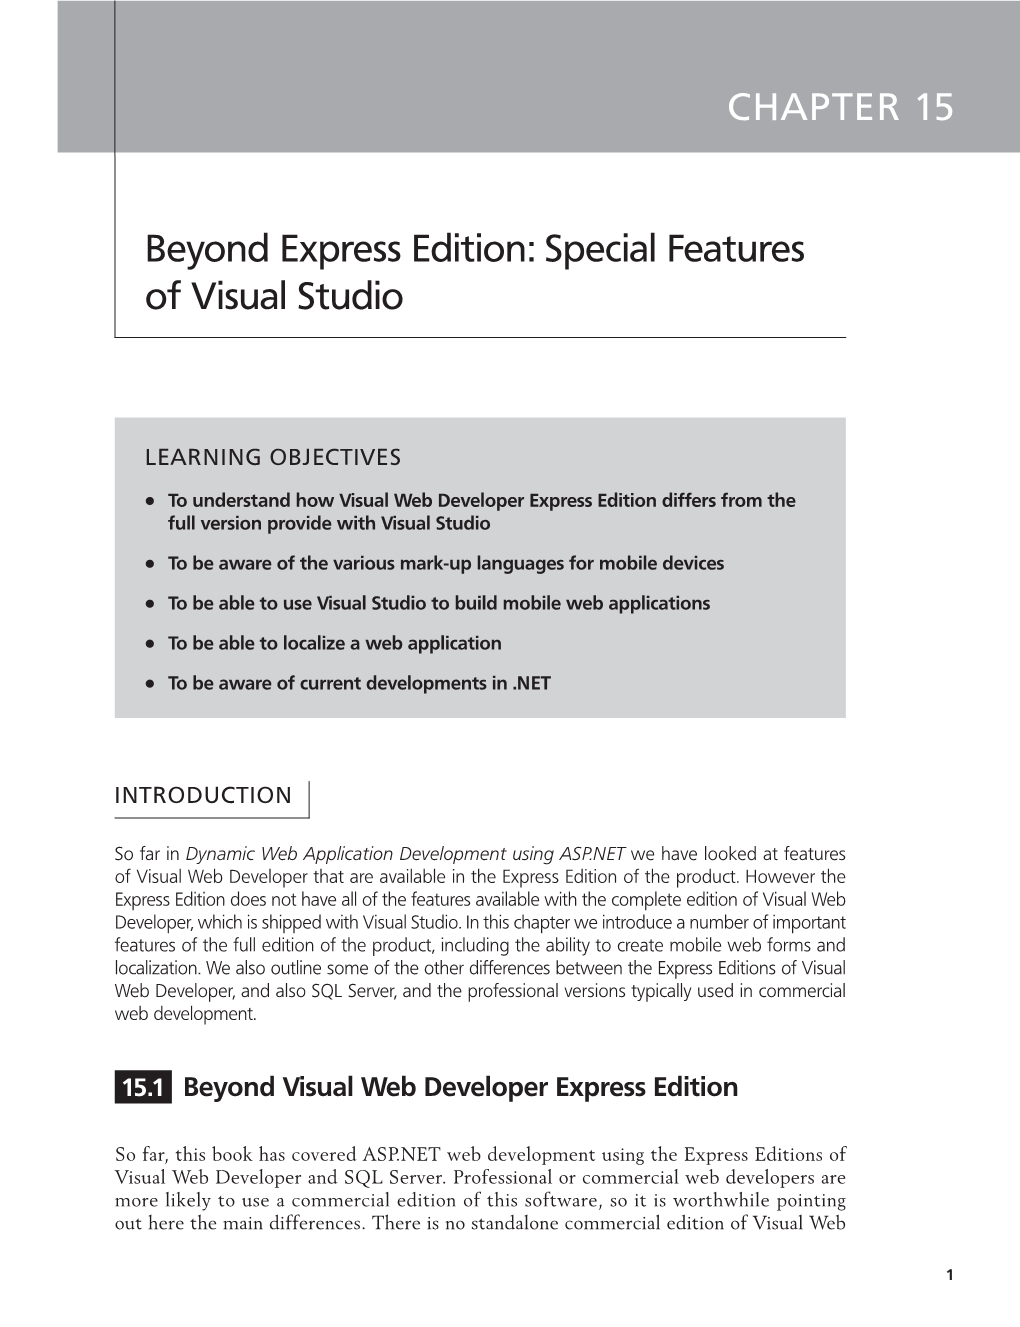 CHAPTER 15 Beyond Express Edition: Special Features of Visual Studio